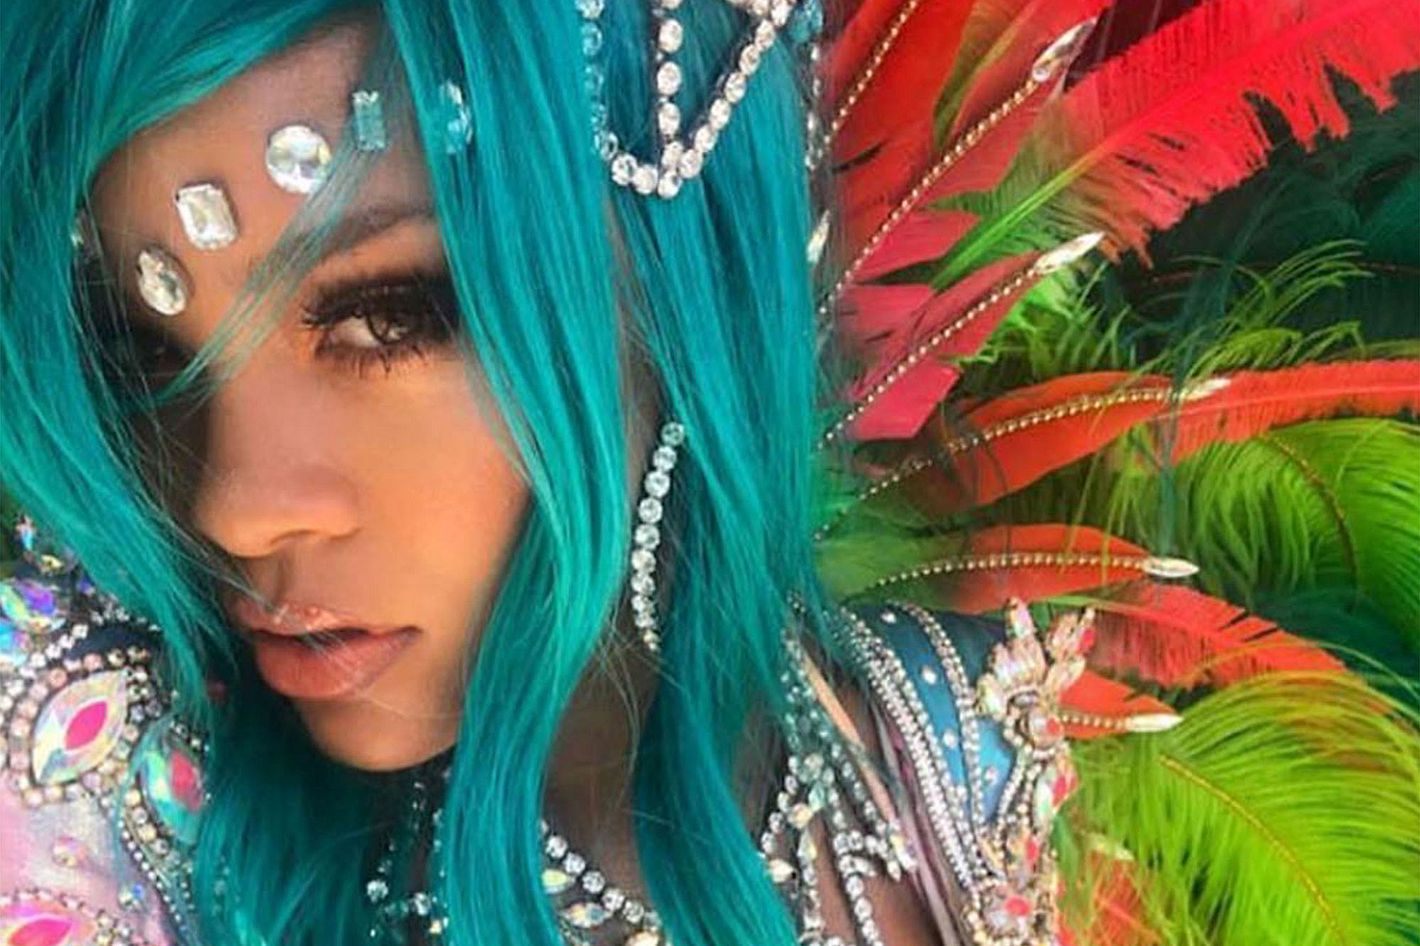 Rihanna Wore Feathers and Crystals to Crop Over Festival